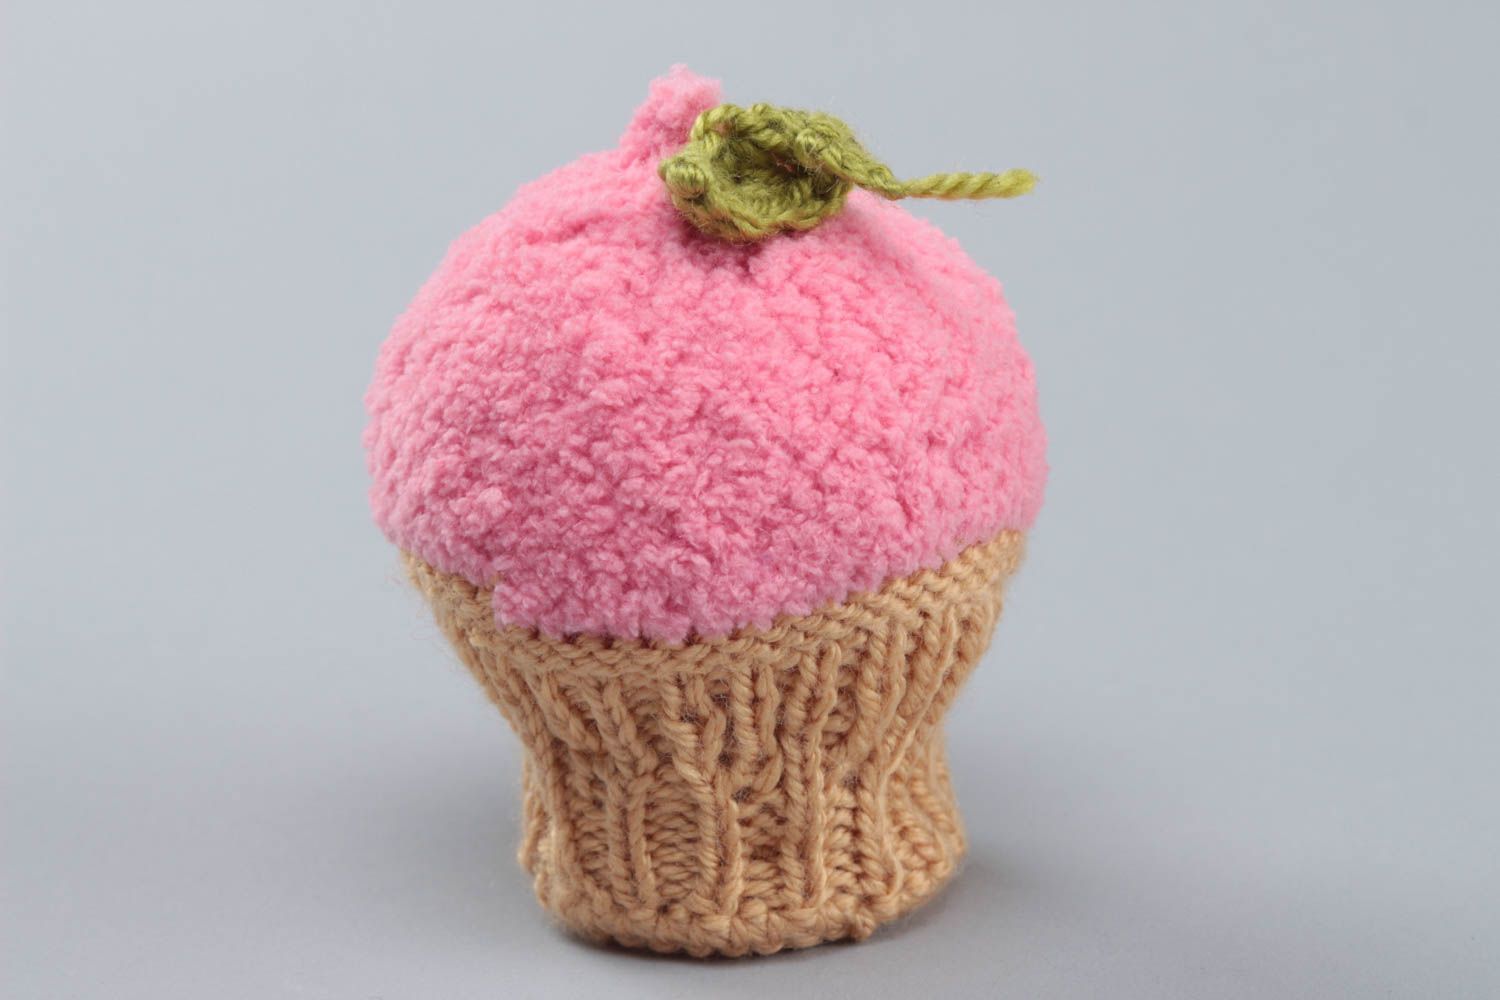 Handmade soft toy crocheted of acrylic threads pink cake for kids and decor photo 2